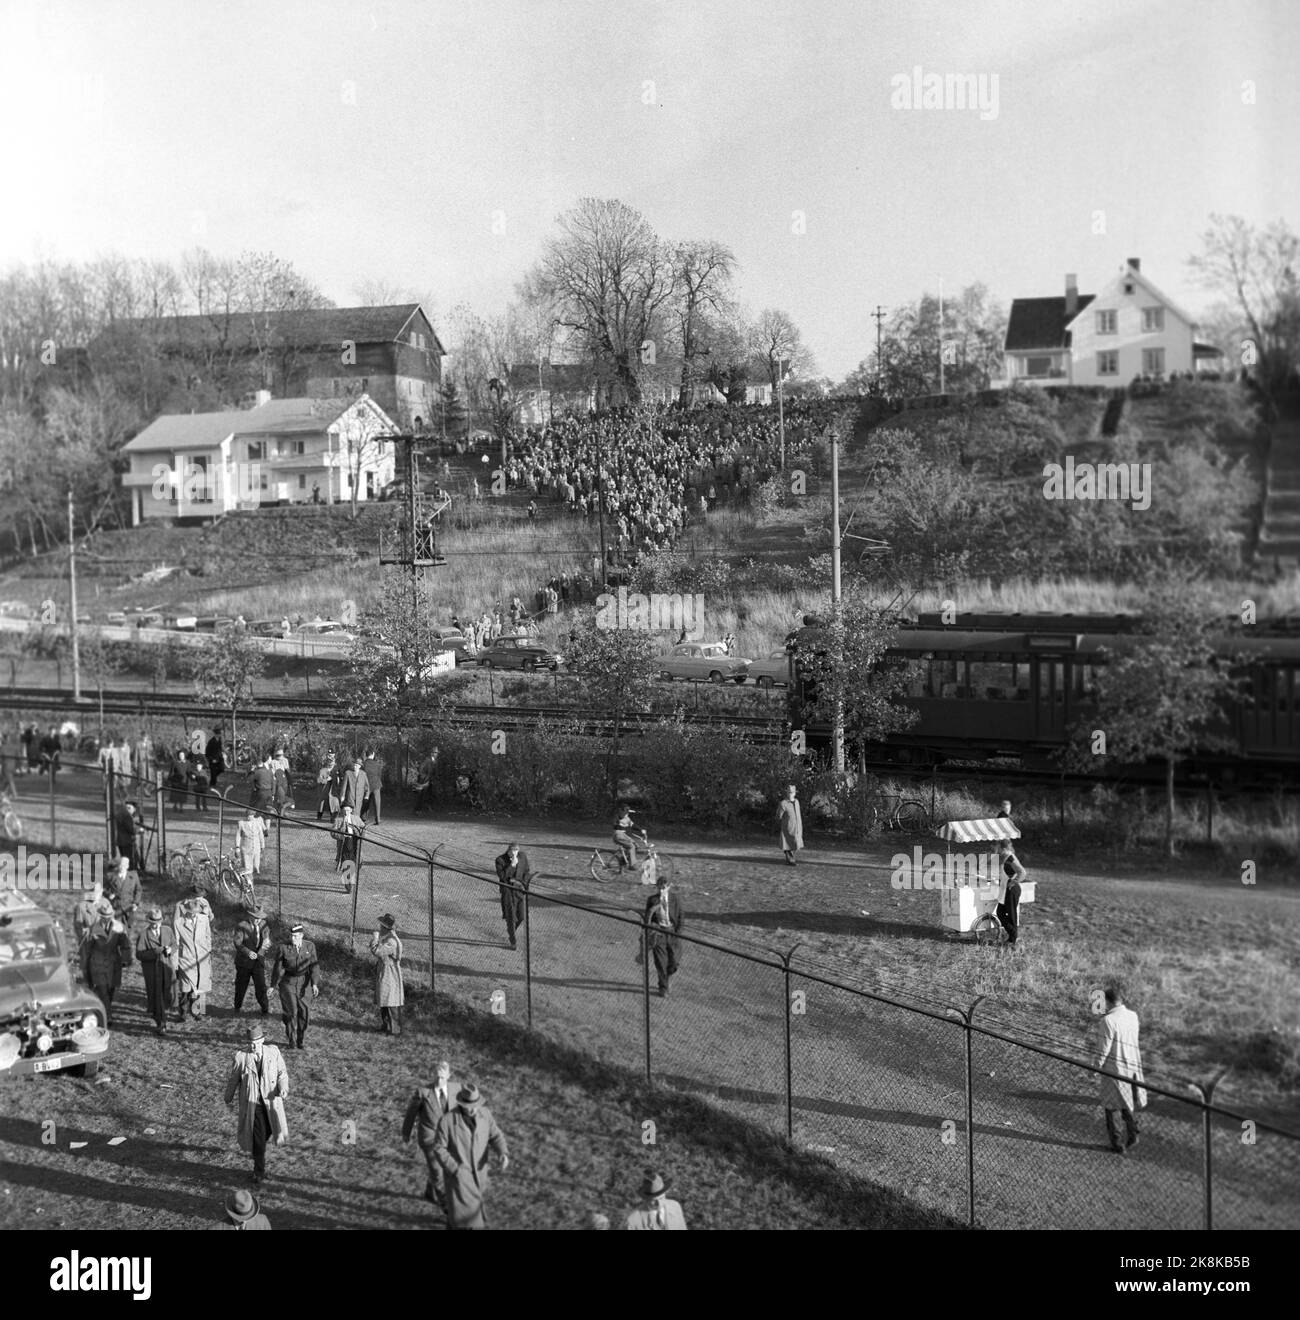 Oslo, 19561021. The cup final at Ullevaal Stadium. Larvik Turn - Skeid 1-2. People are on their way to the stadium. Notice the downfall under the tram rail and the single sausage seller. Photo: Current / NTB Stock Photo